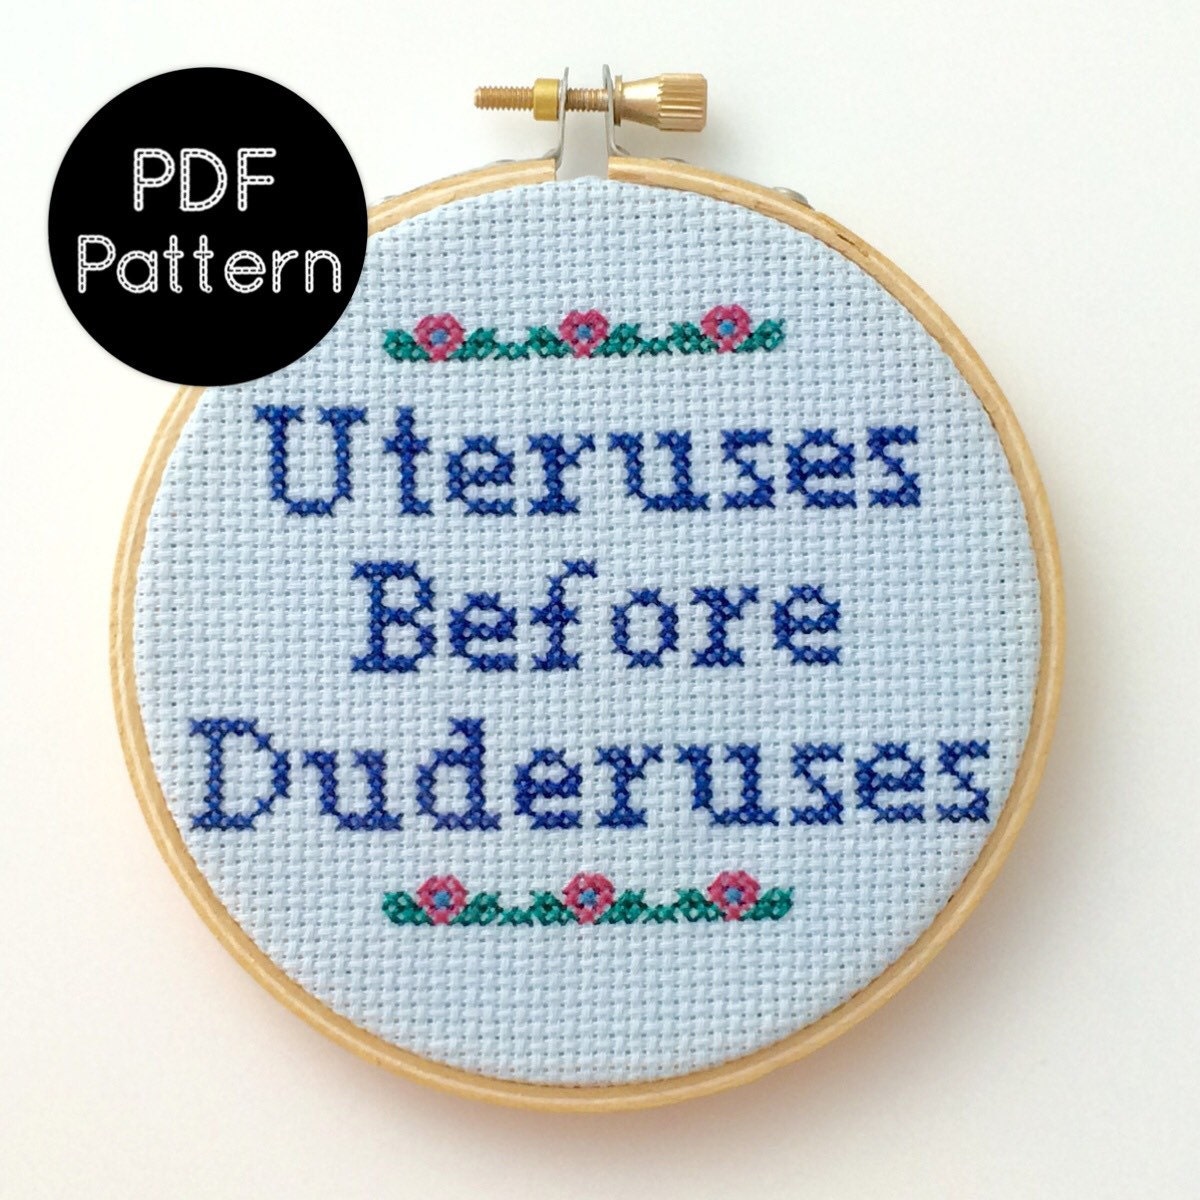 PATTERN - Uteruses Before Duderuses - Parks & Recreation Quote - Funny Cross Stitch ...1200 x 1200